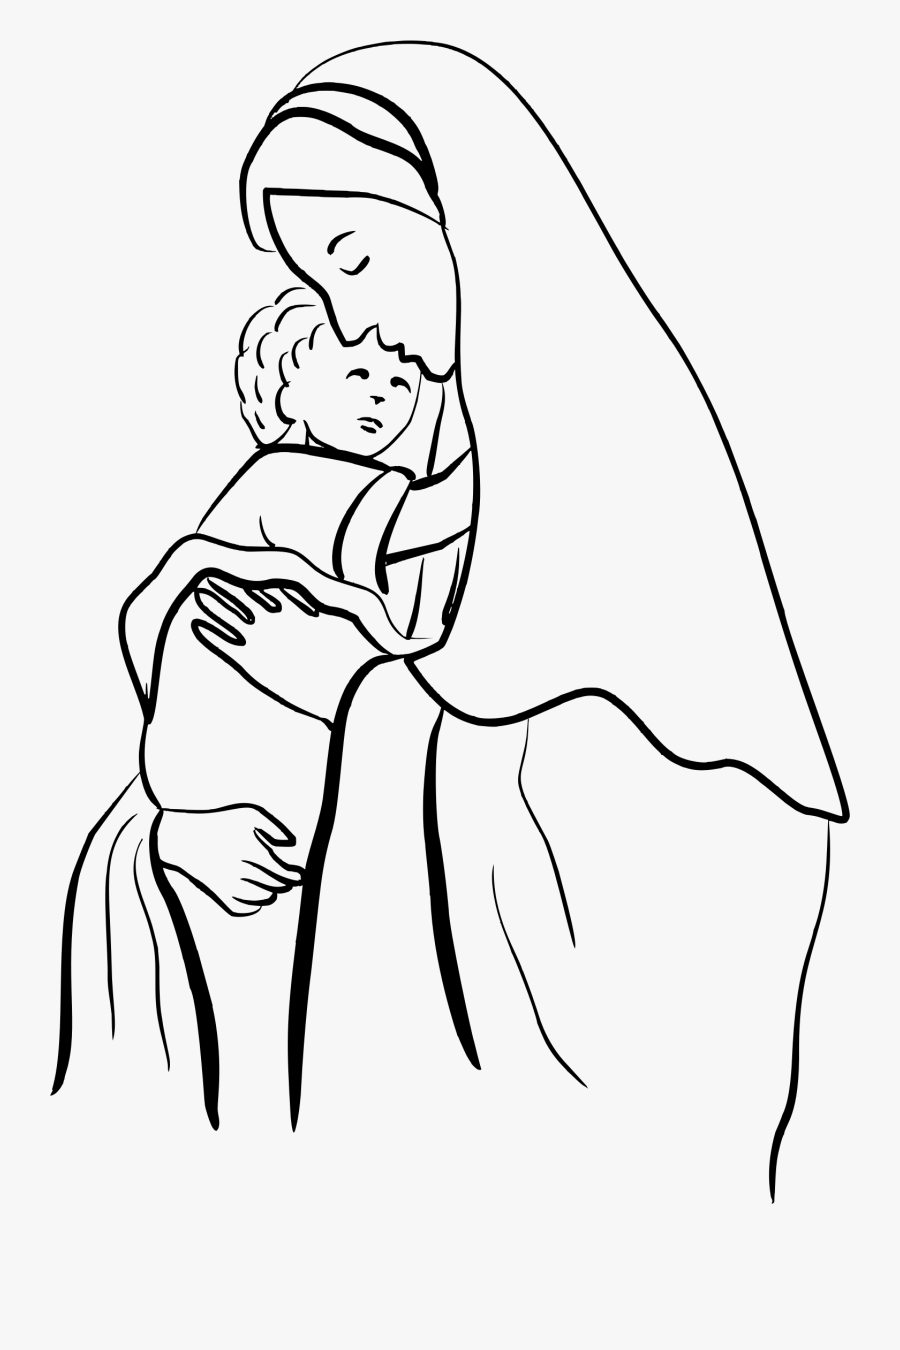 Mother Mary Drawing / Mother mary and baby jesus drawings. - Underrated